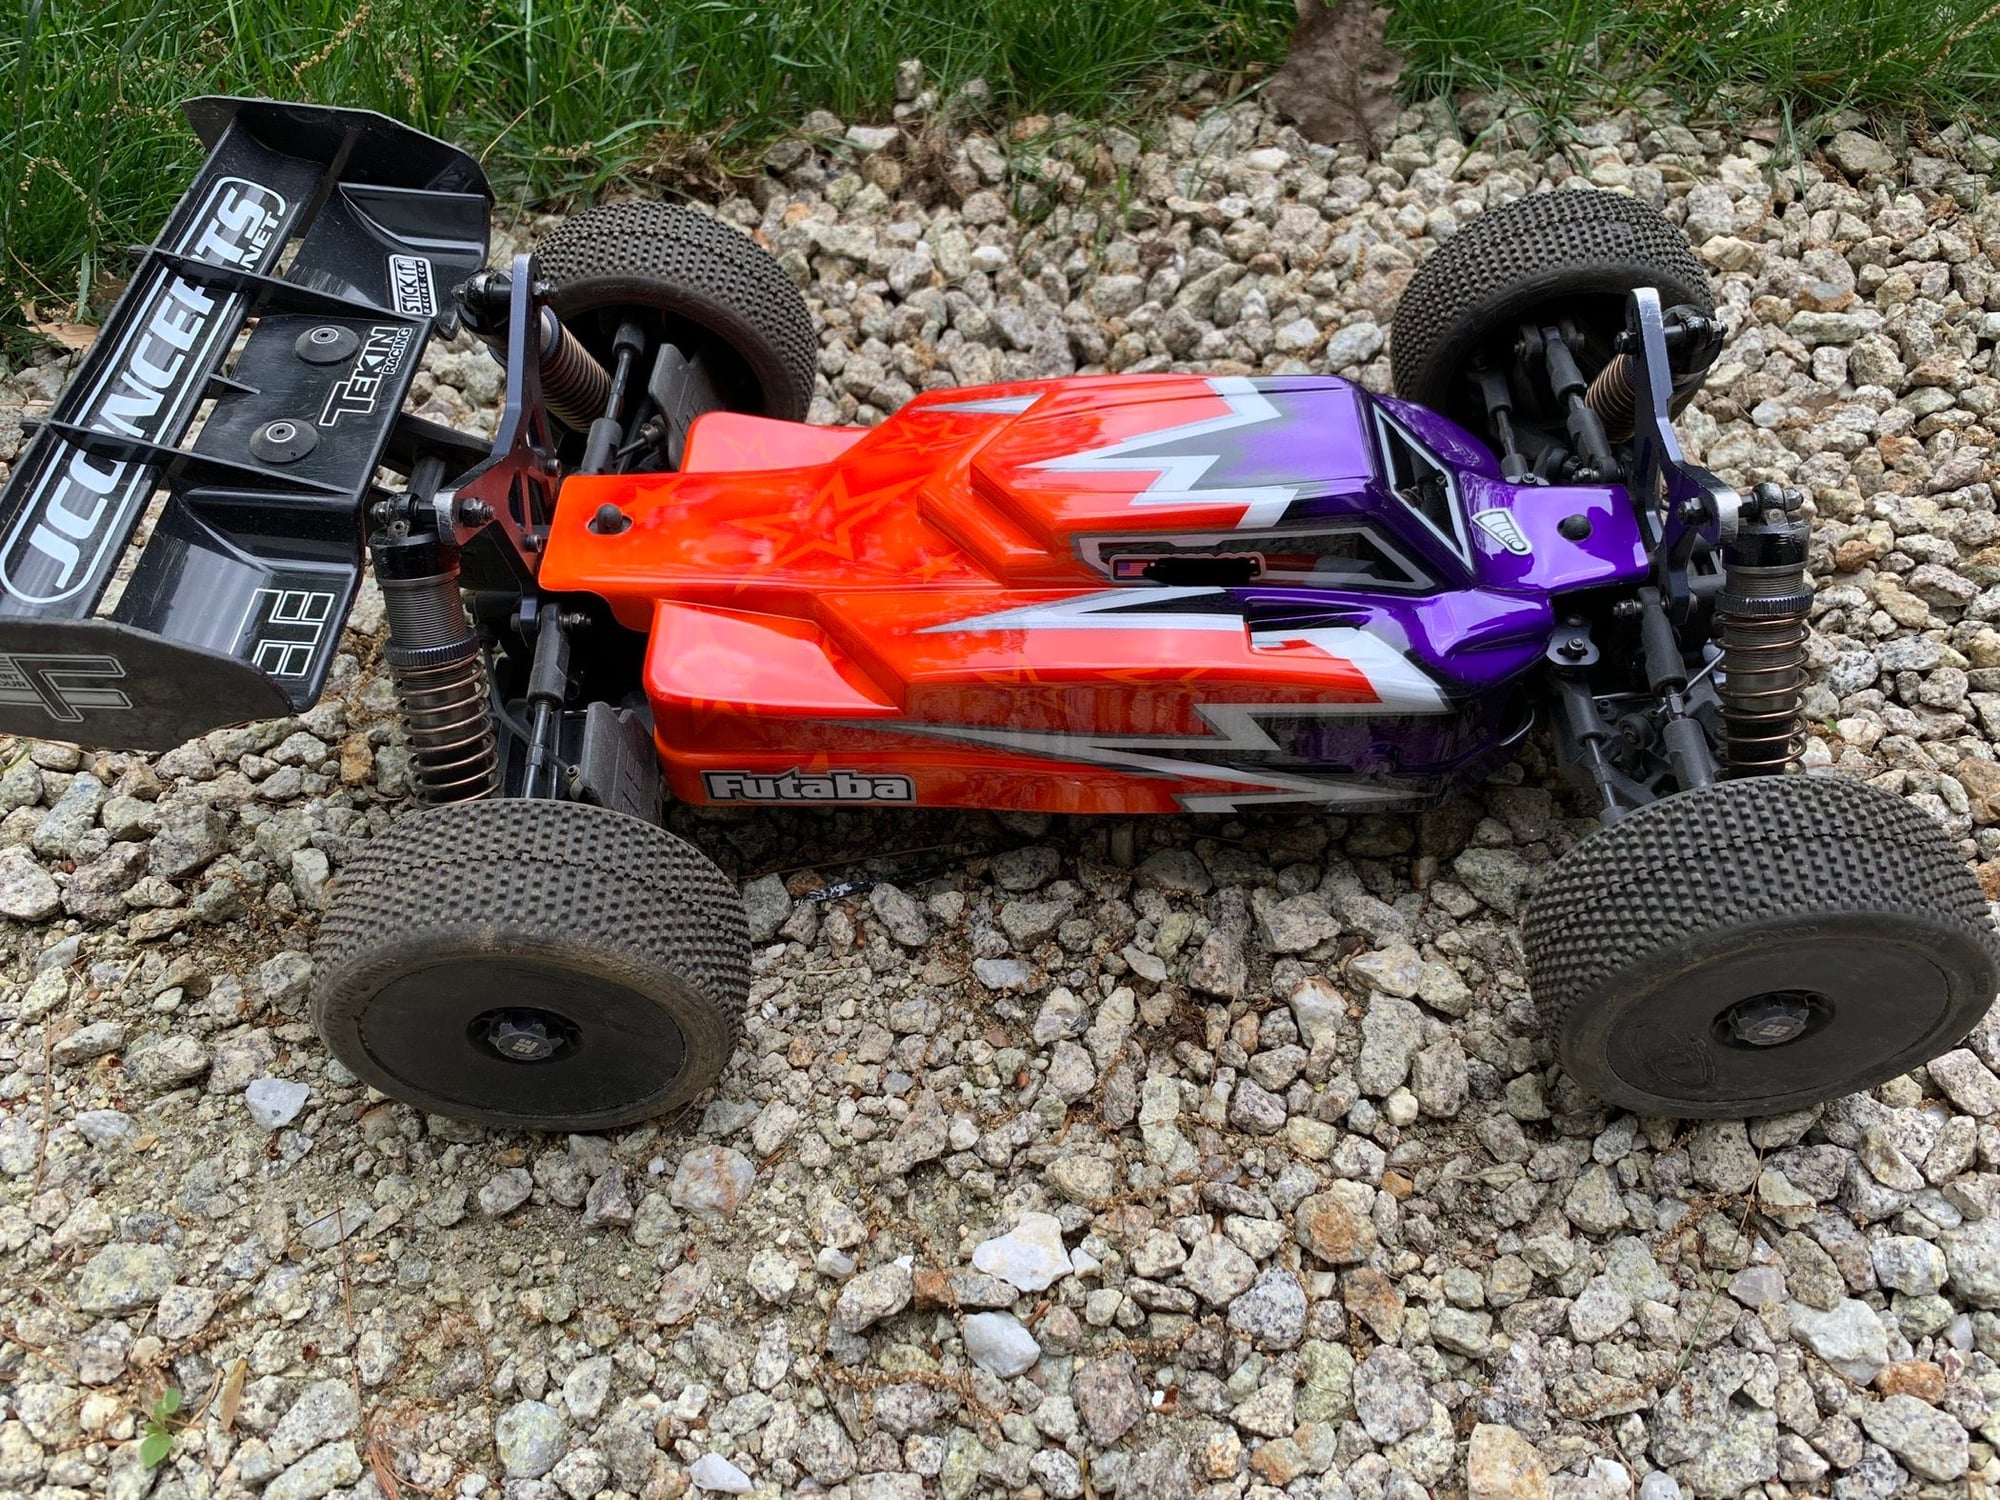 FOR SALE: Tekno et48.3 and Tekno eb48.4 Sliders / Rollers for sale - R